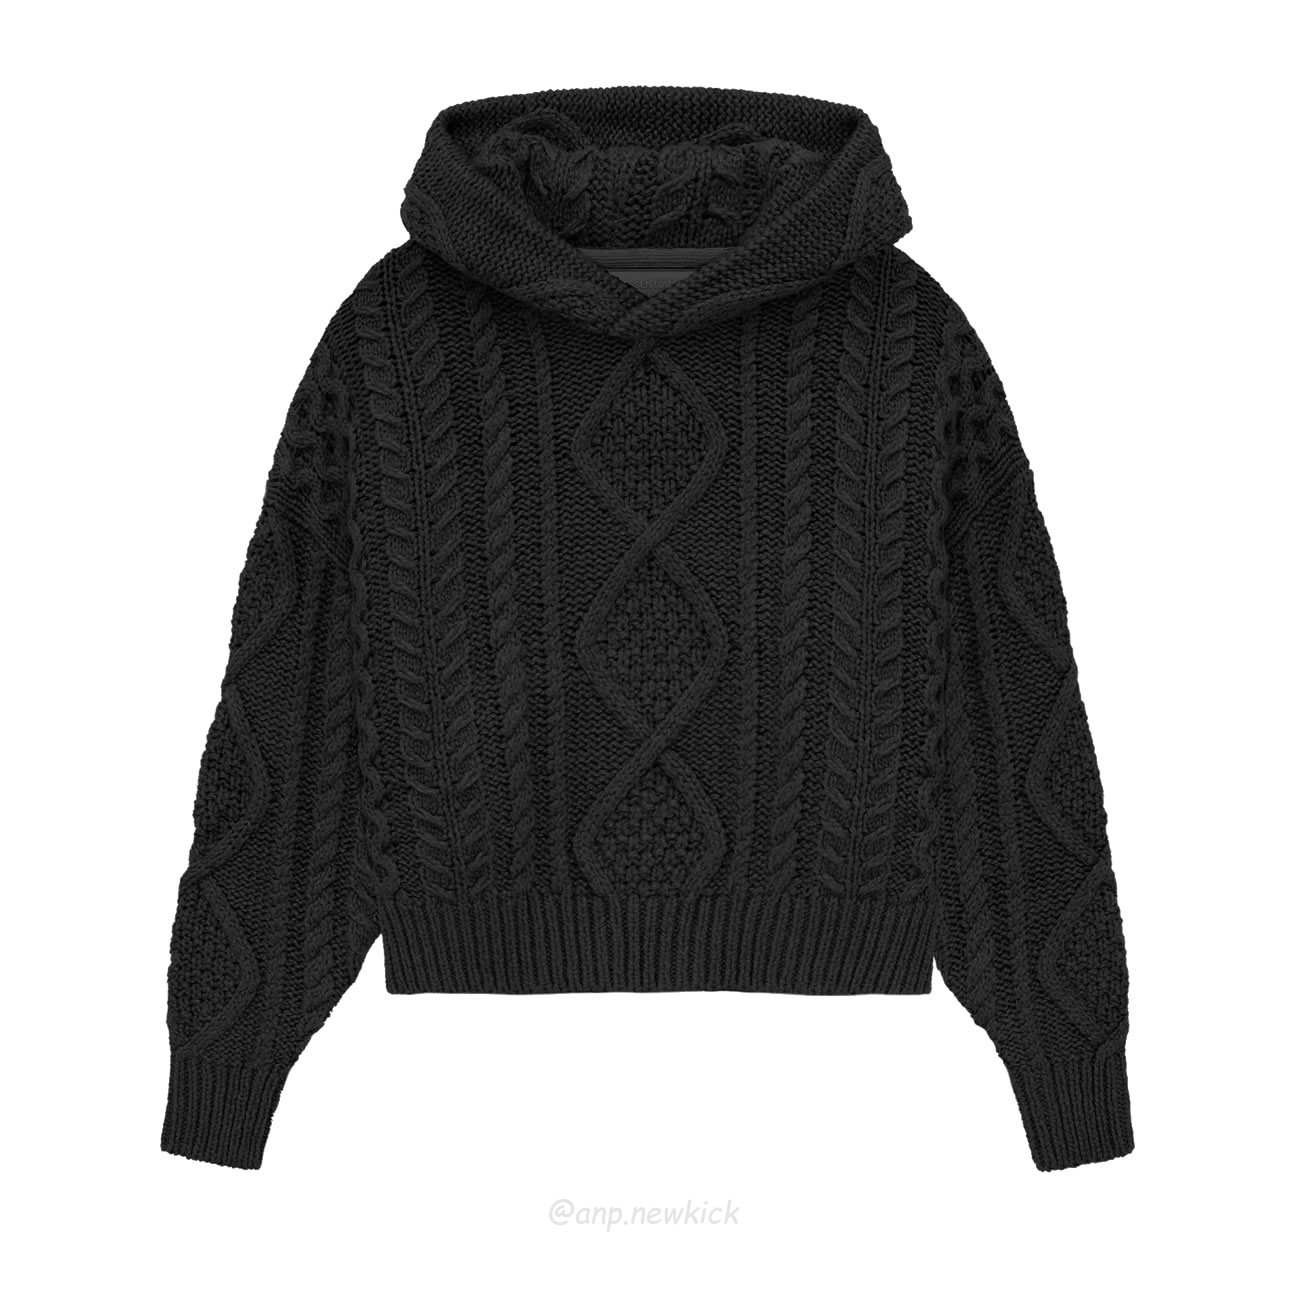 Fear Of God Essentials Fog 23fw New Collection Of Hooded Sweaters In Black Elephant White Beige White S Xl (9) - newkick.org